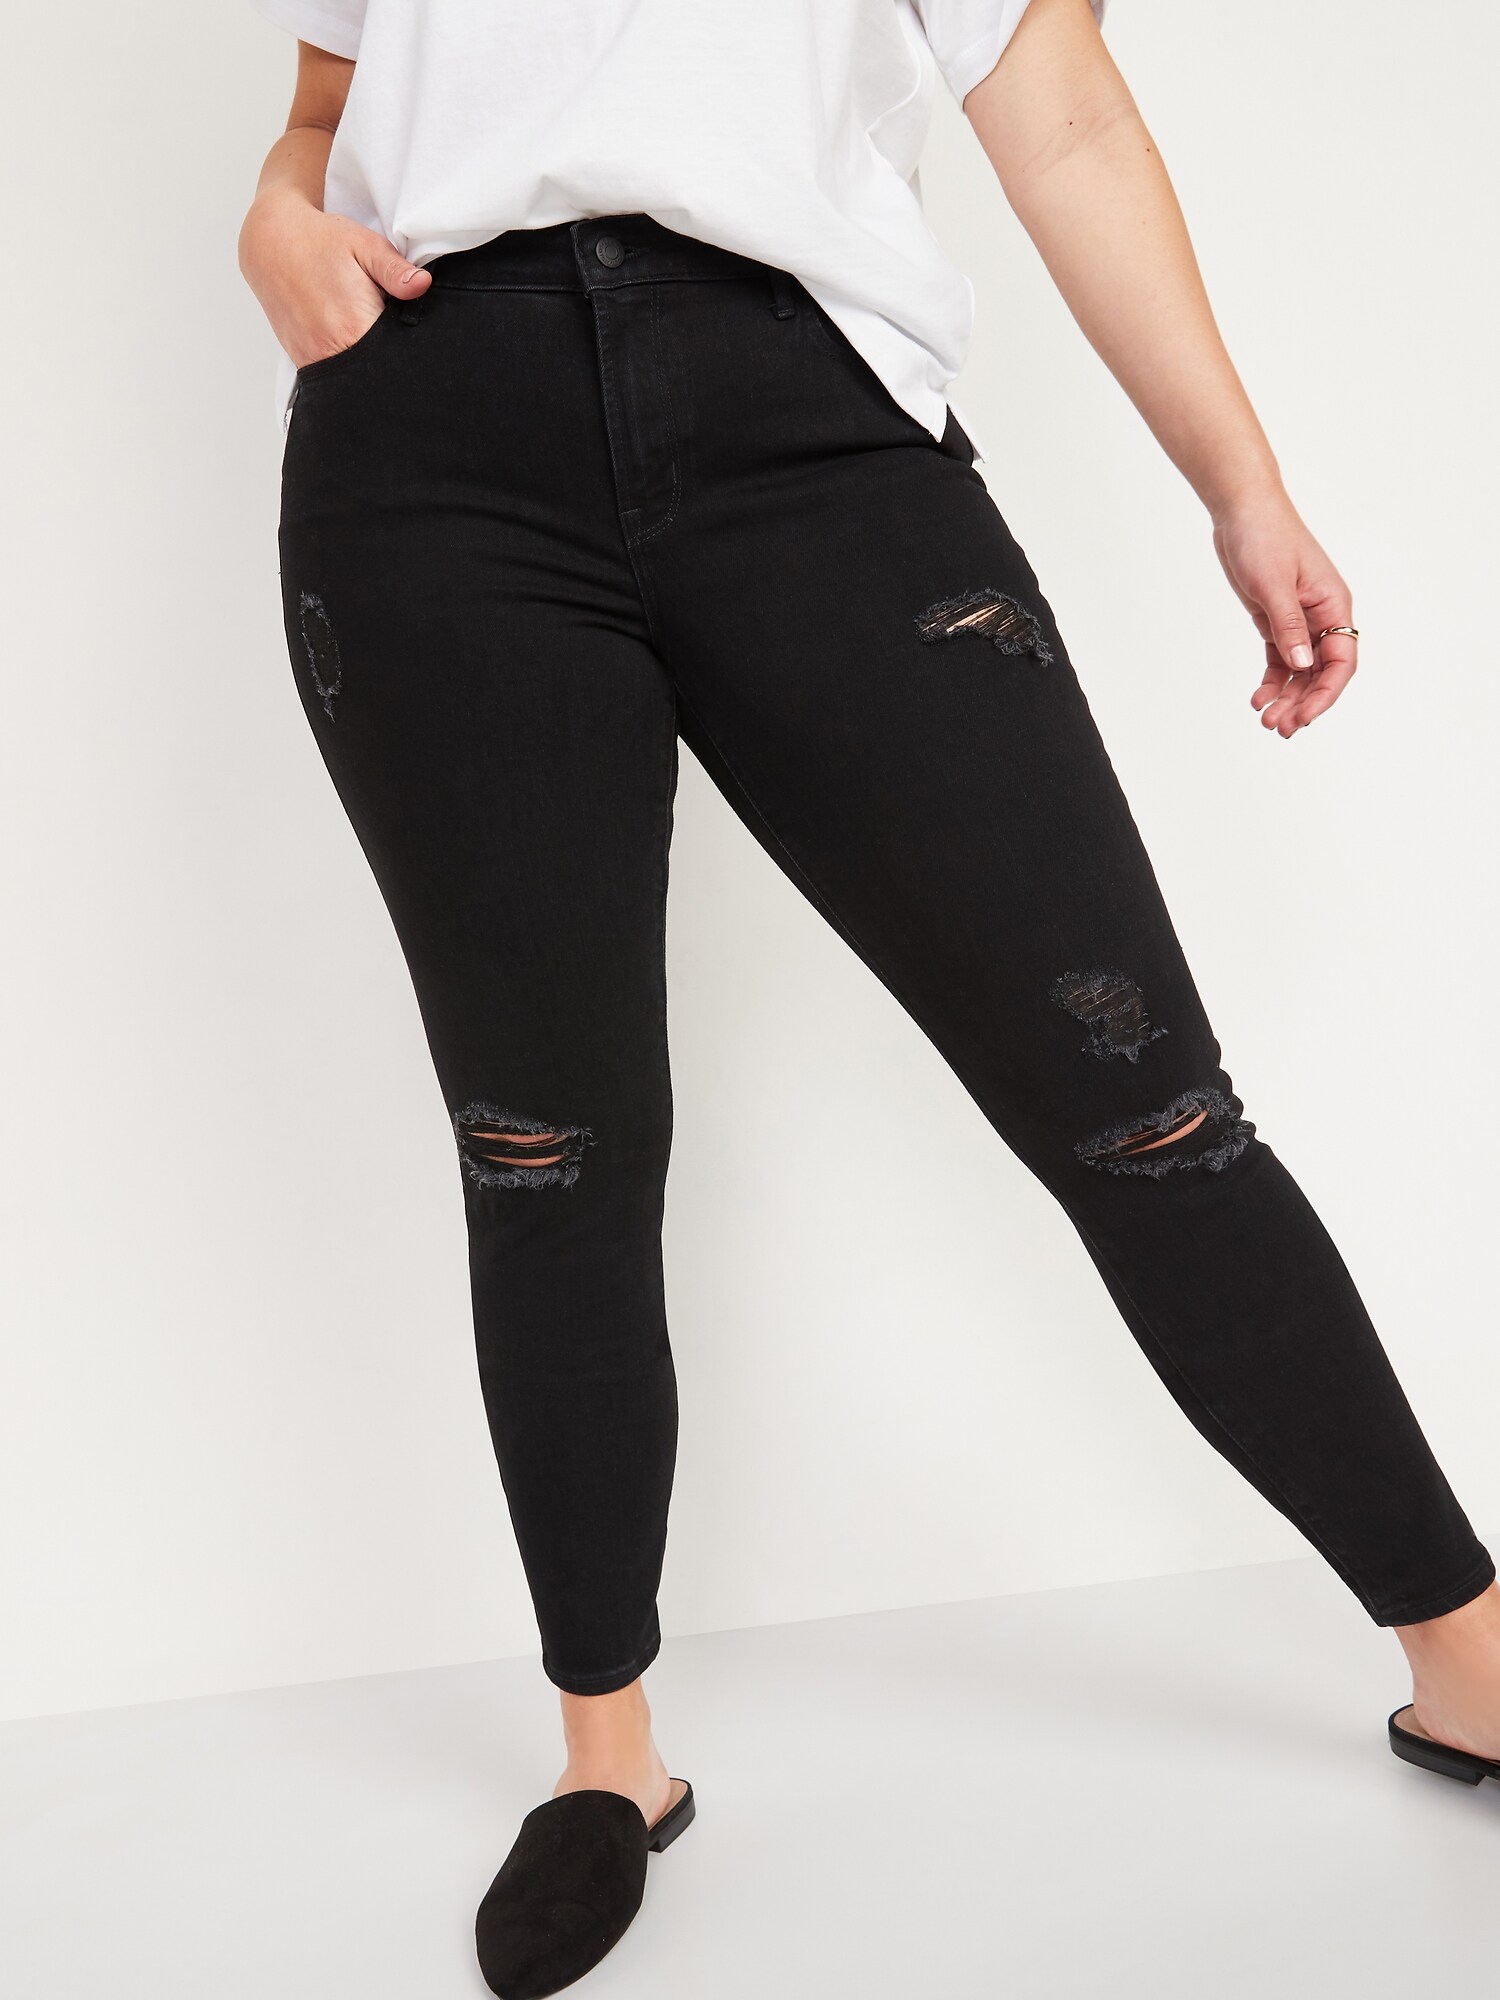 Mid-Rise Pop Icon Skinny Black Ripped Jeans for Women